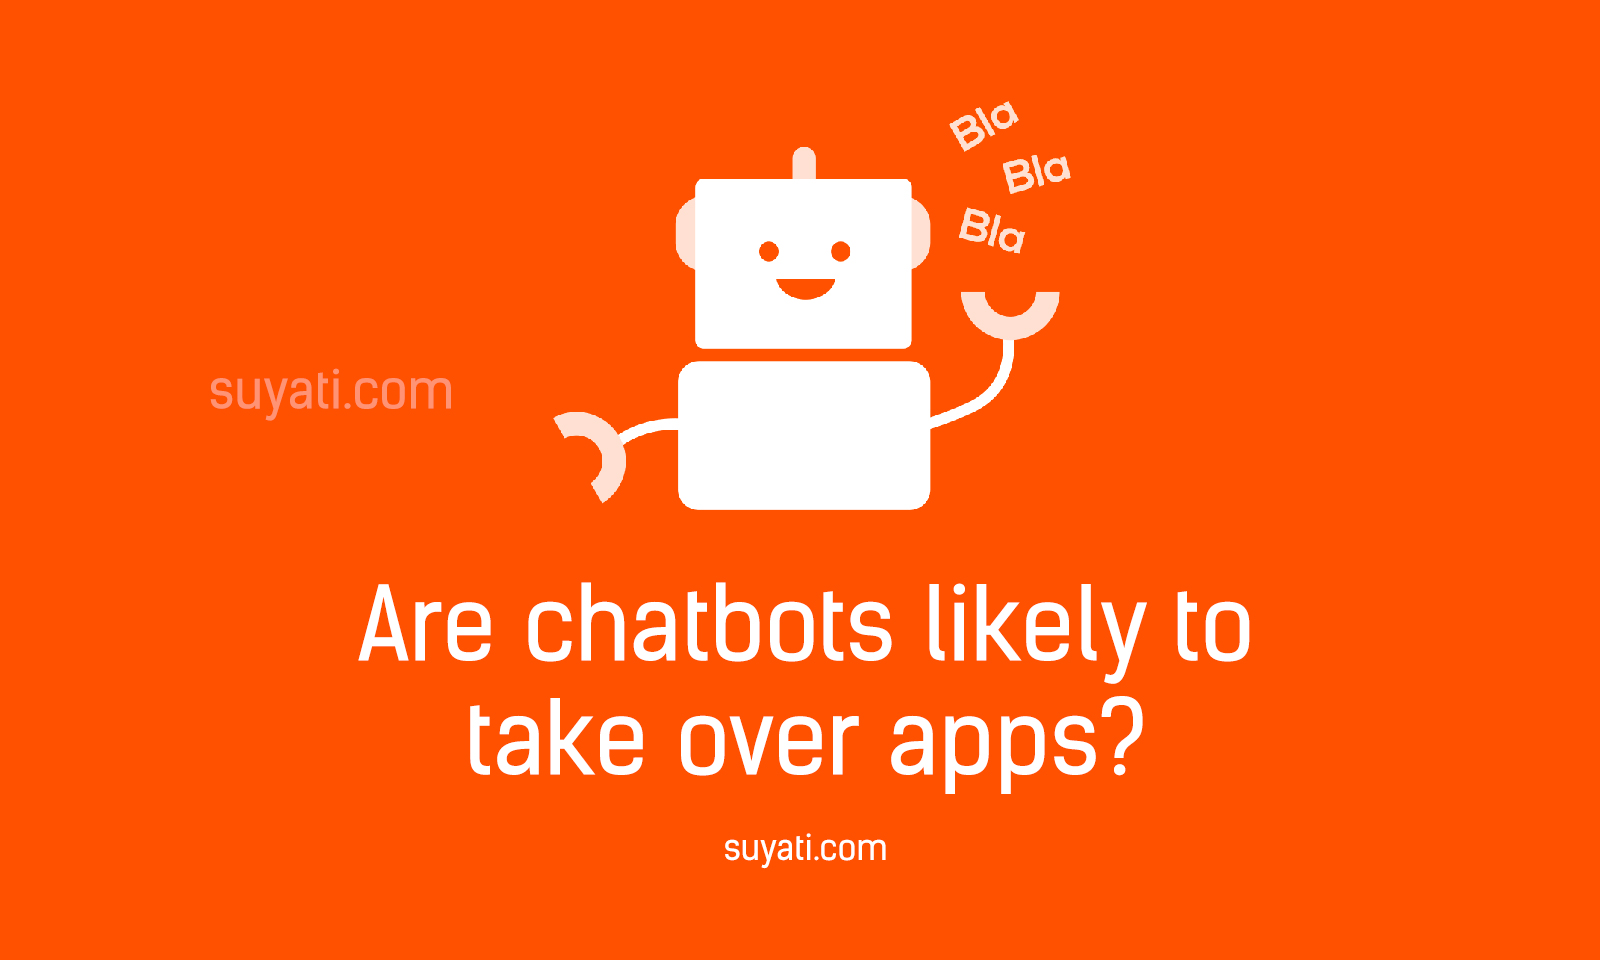 Are chatbots likely to take over apps